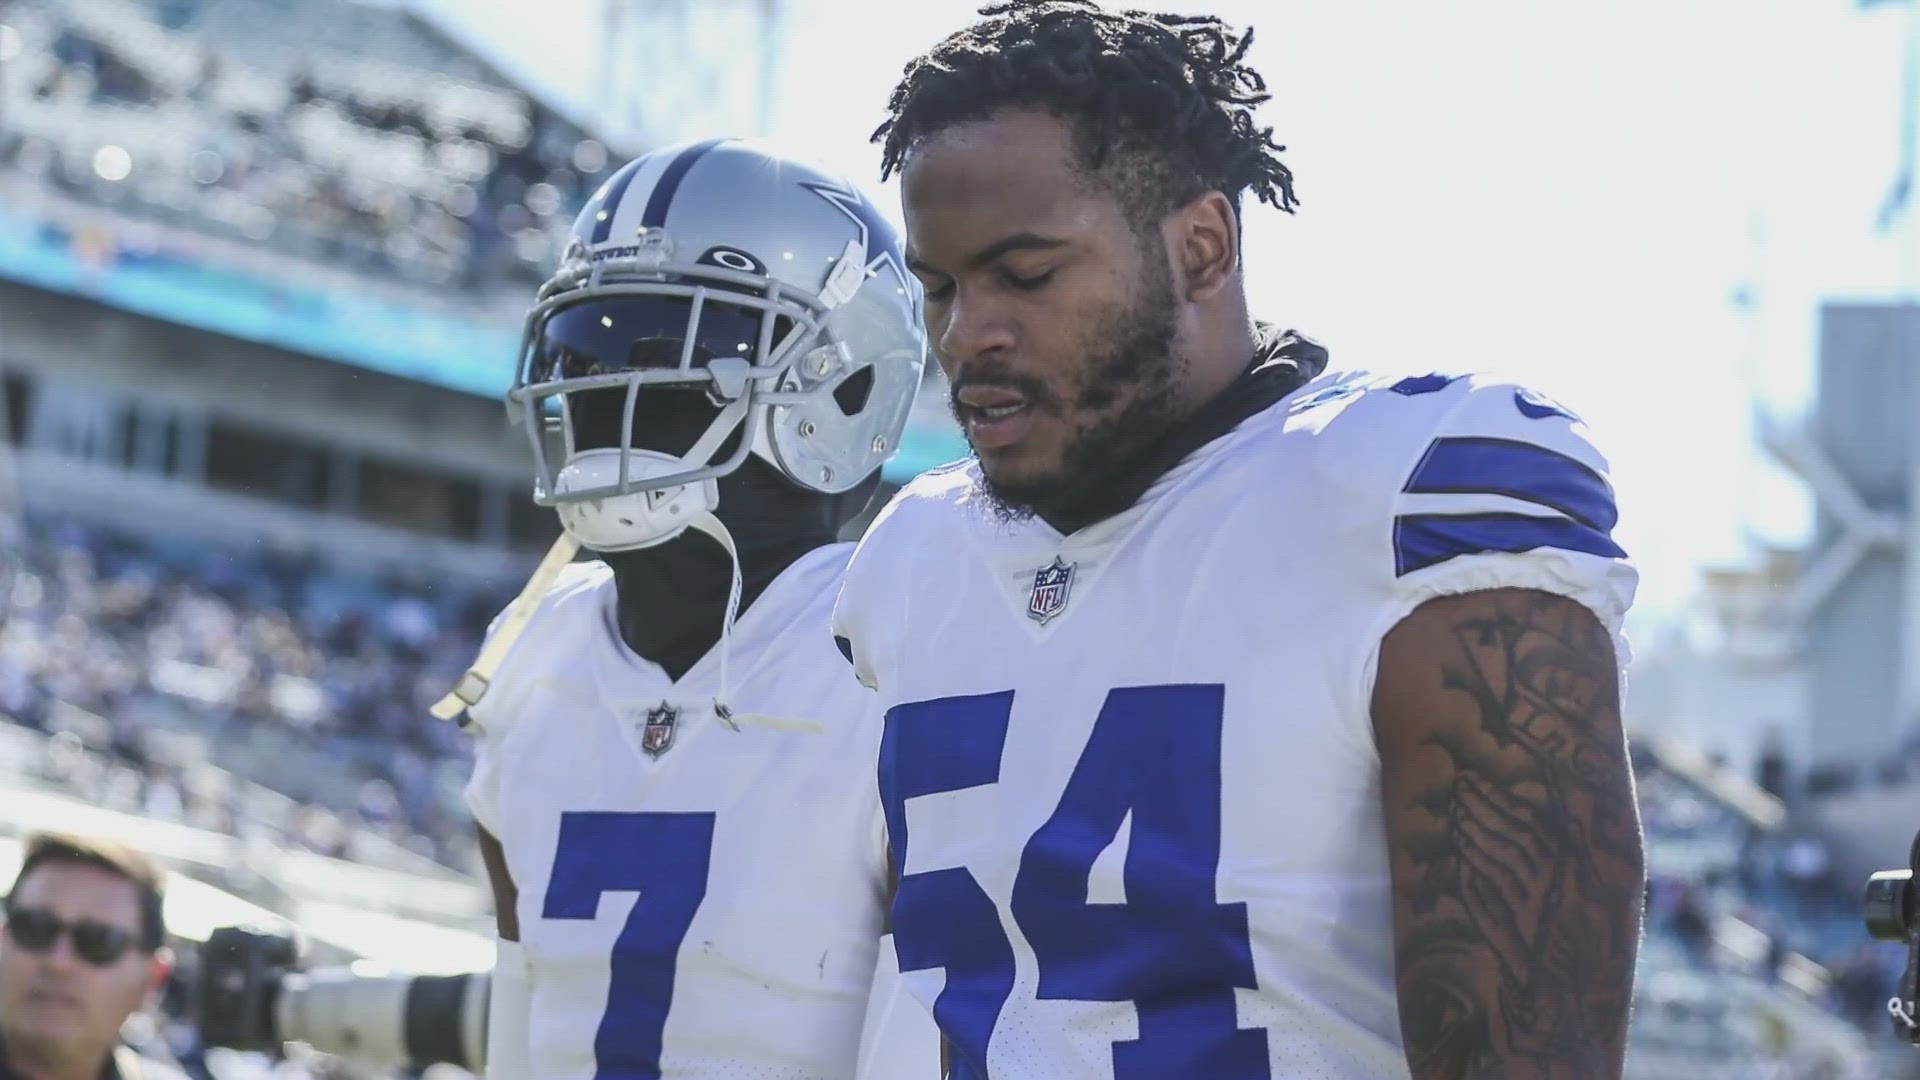 Frisco police confirmed that Williams, a second-year player for the Cowboys, was arrested on two charges.